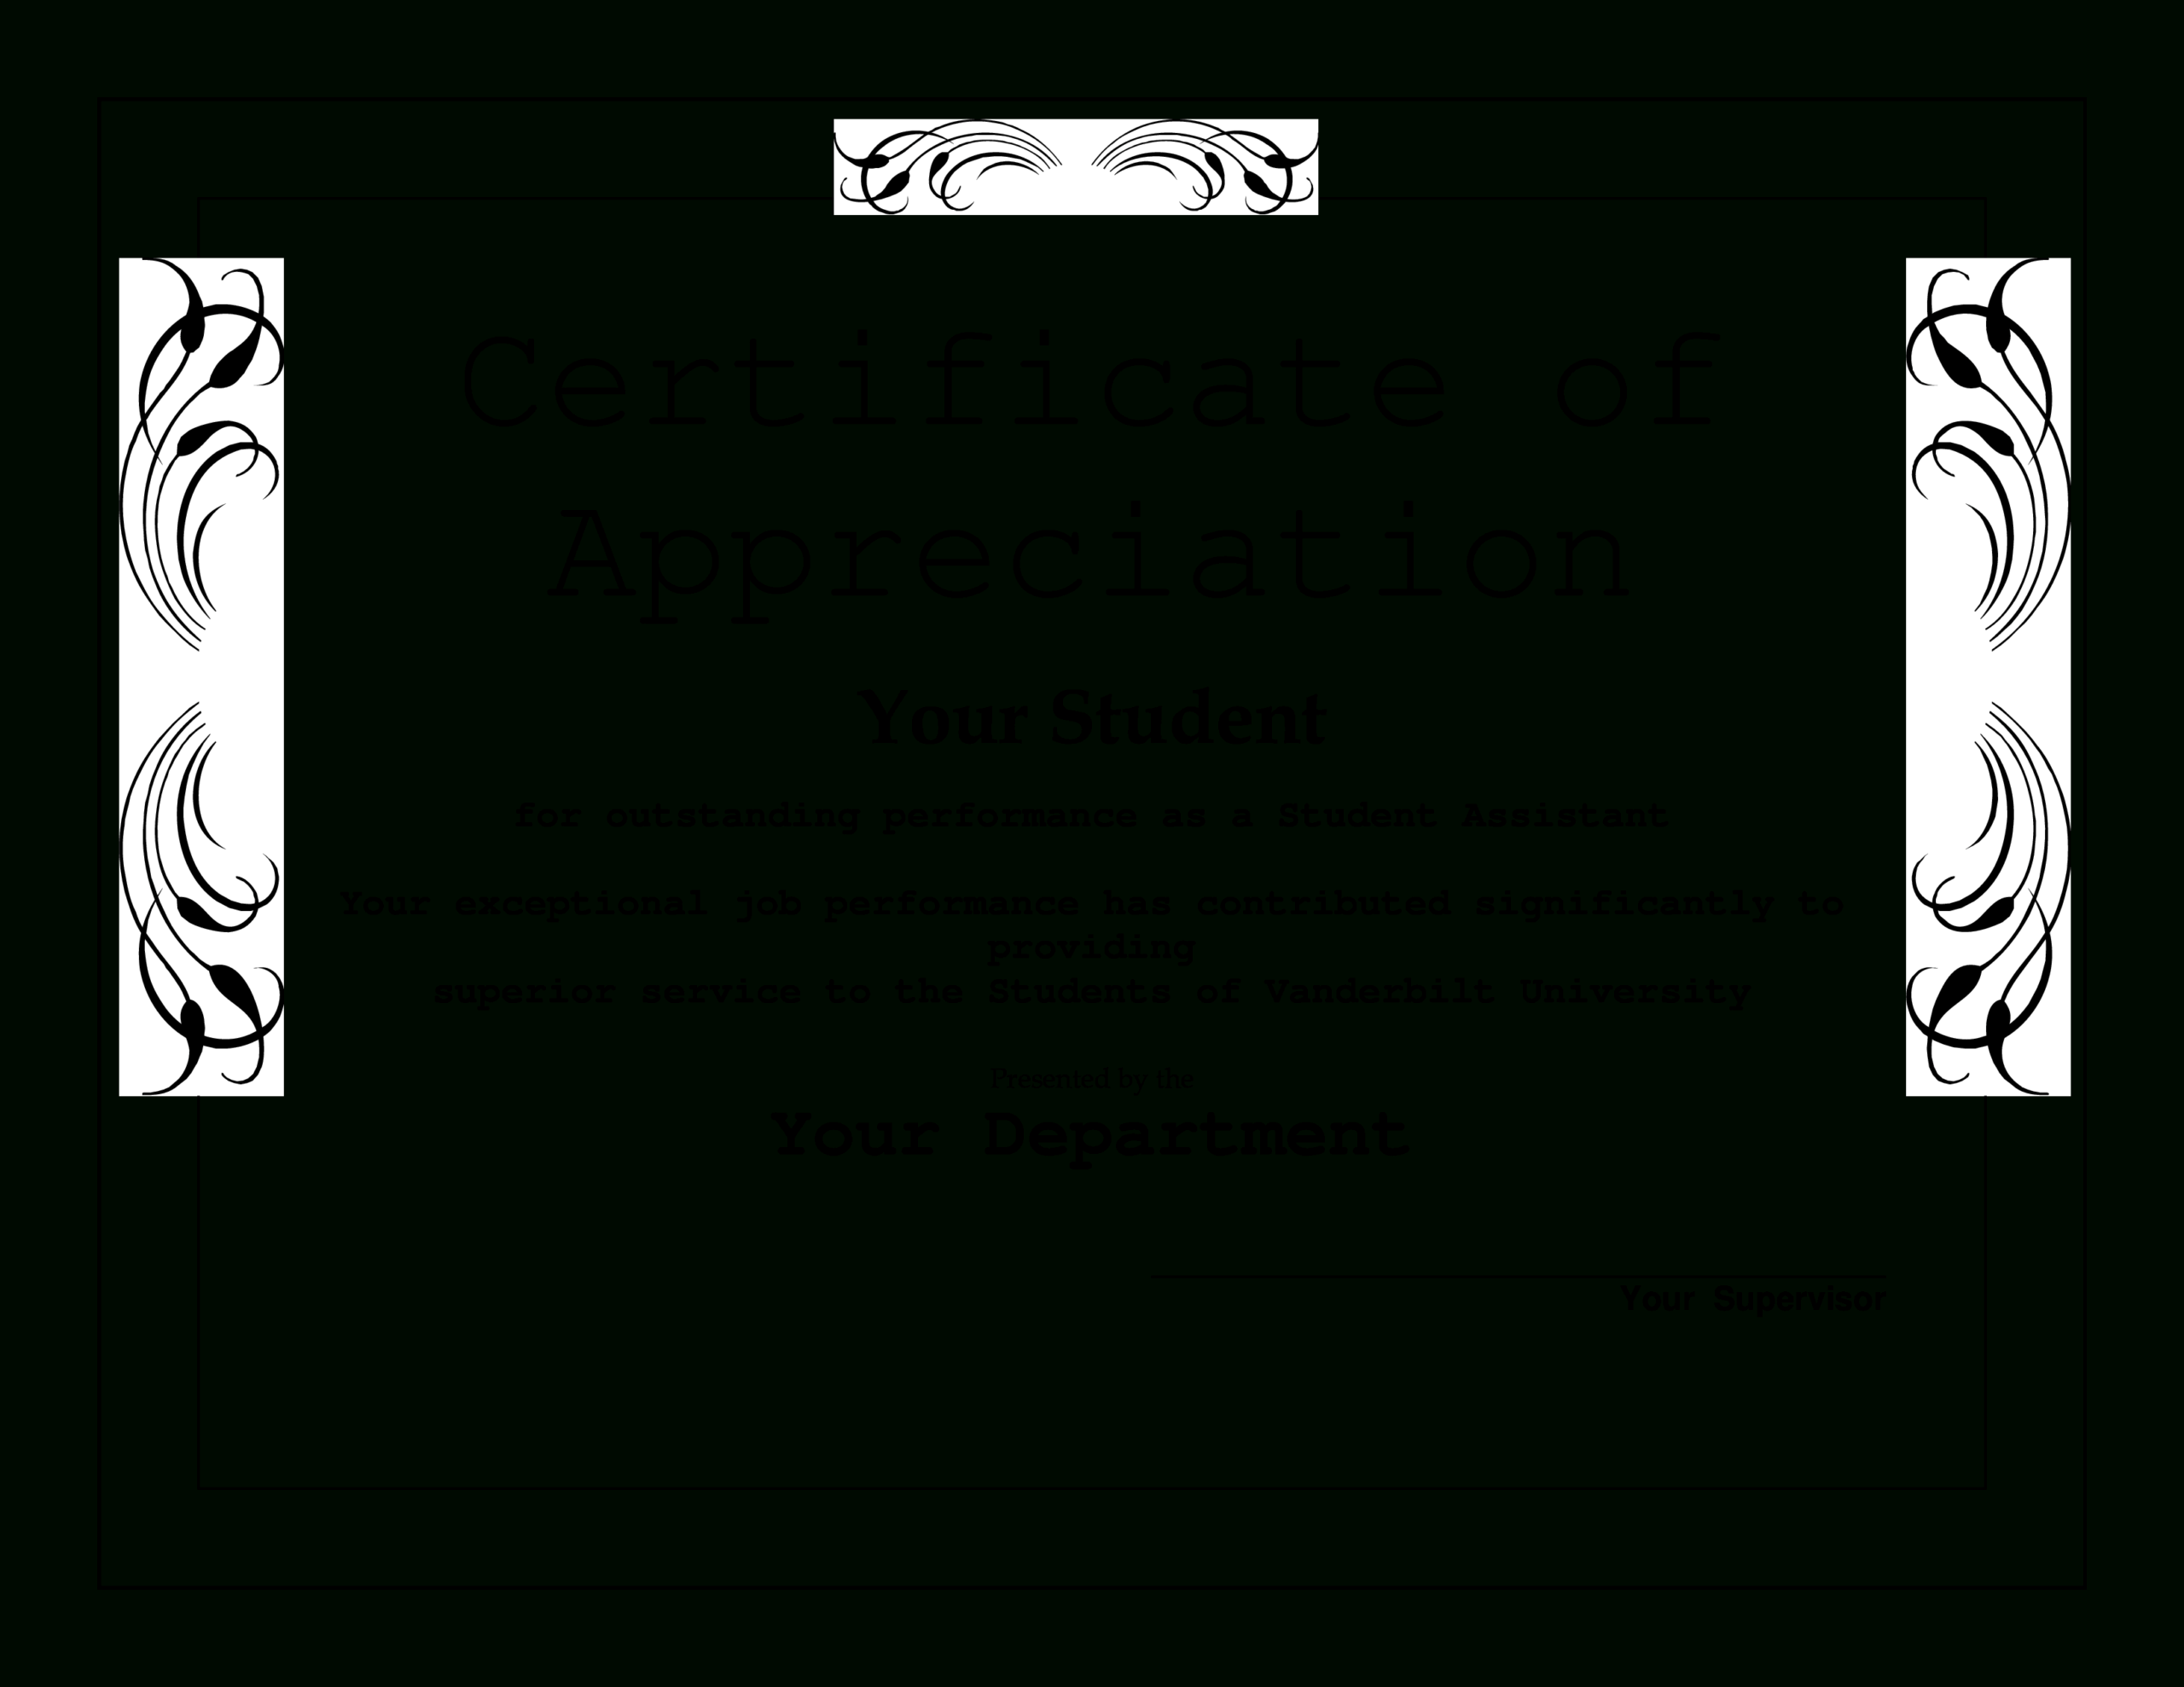 Student Appreciation Award | Templates At Inside Student Of The Year Award Certificate Templates